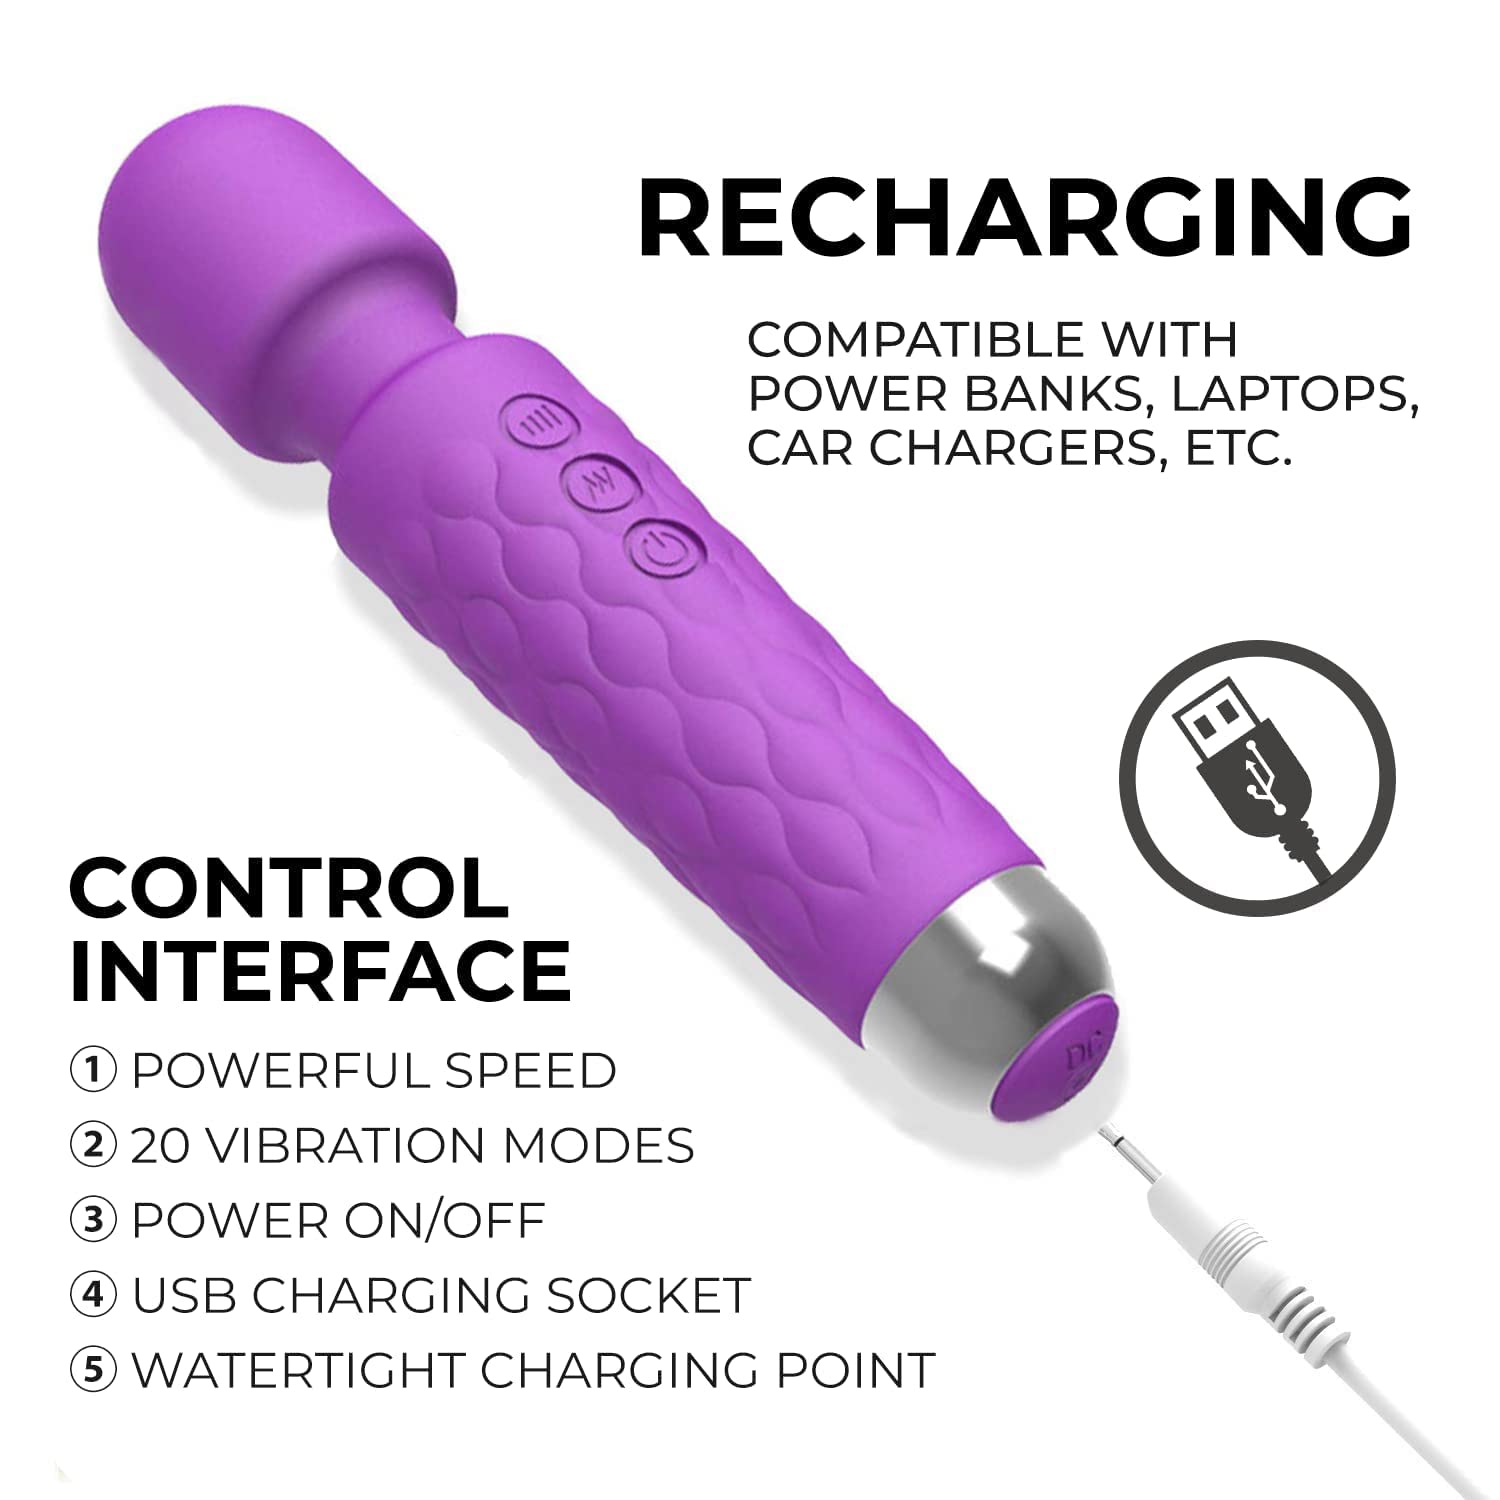 Indulge in Blissful Relaxation with Our Waterproof Rechargeable Personal Body Massager - 20 Vibration Modes, 8 Speed Patterns for Ultimate Pain Relief